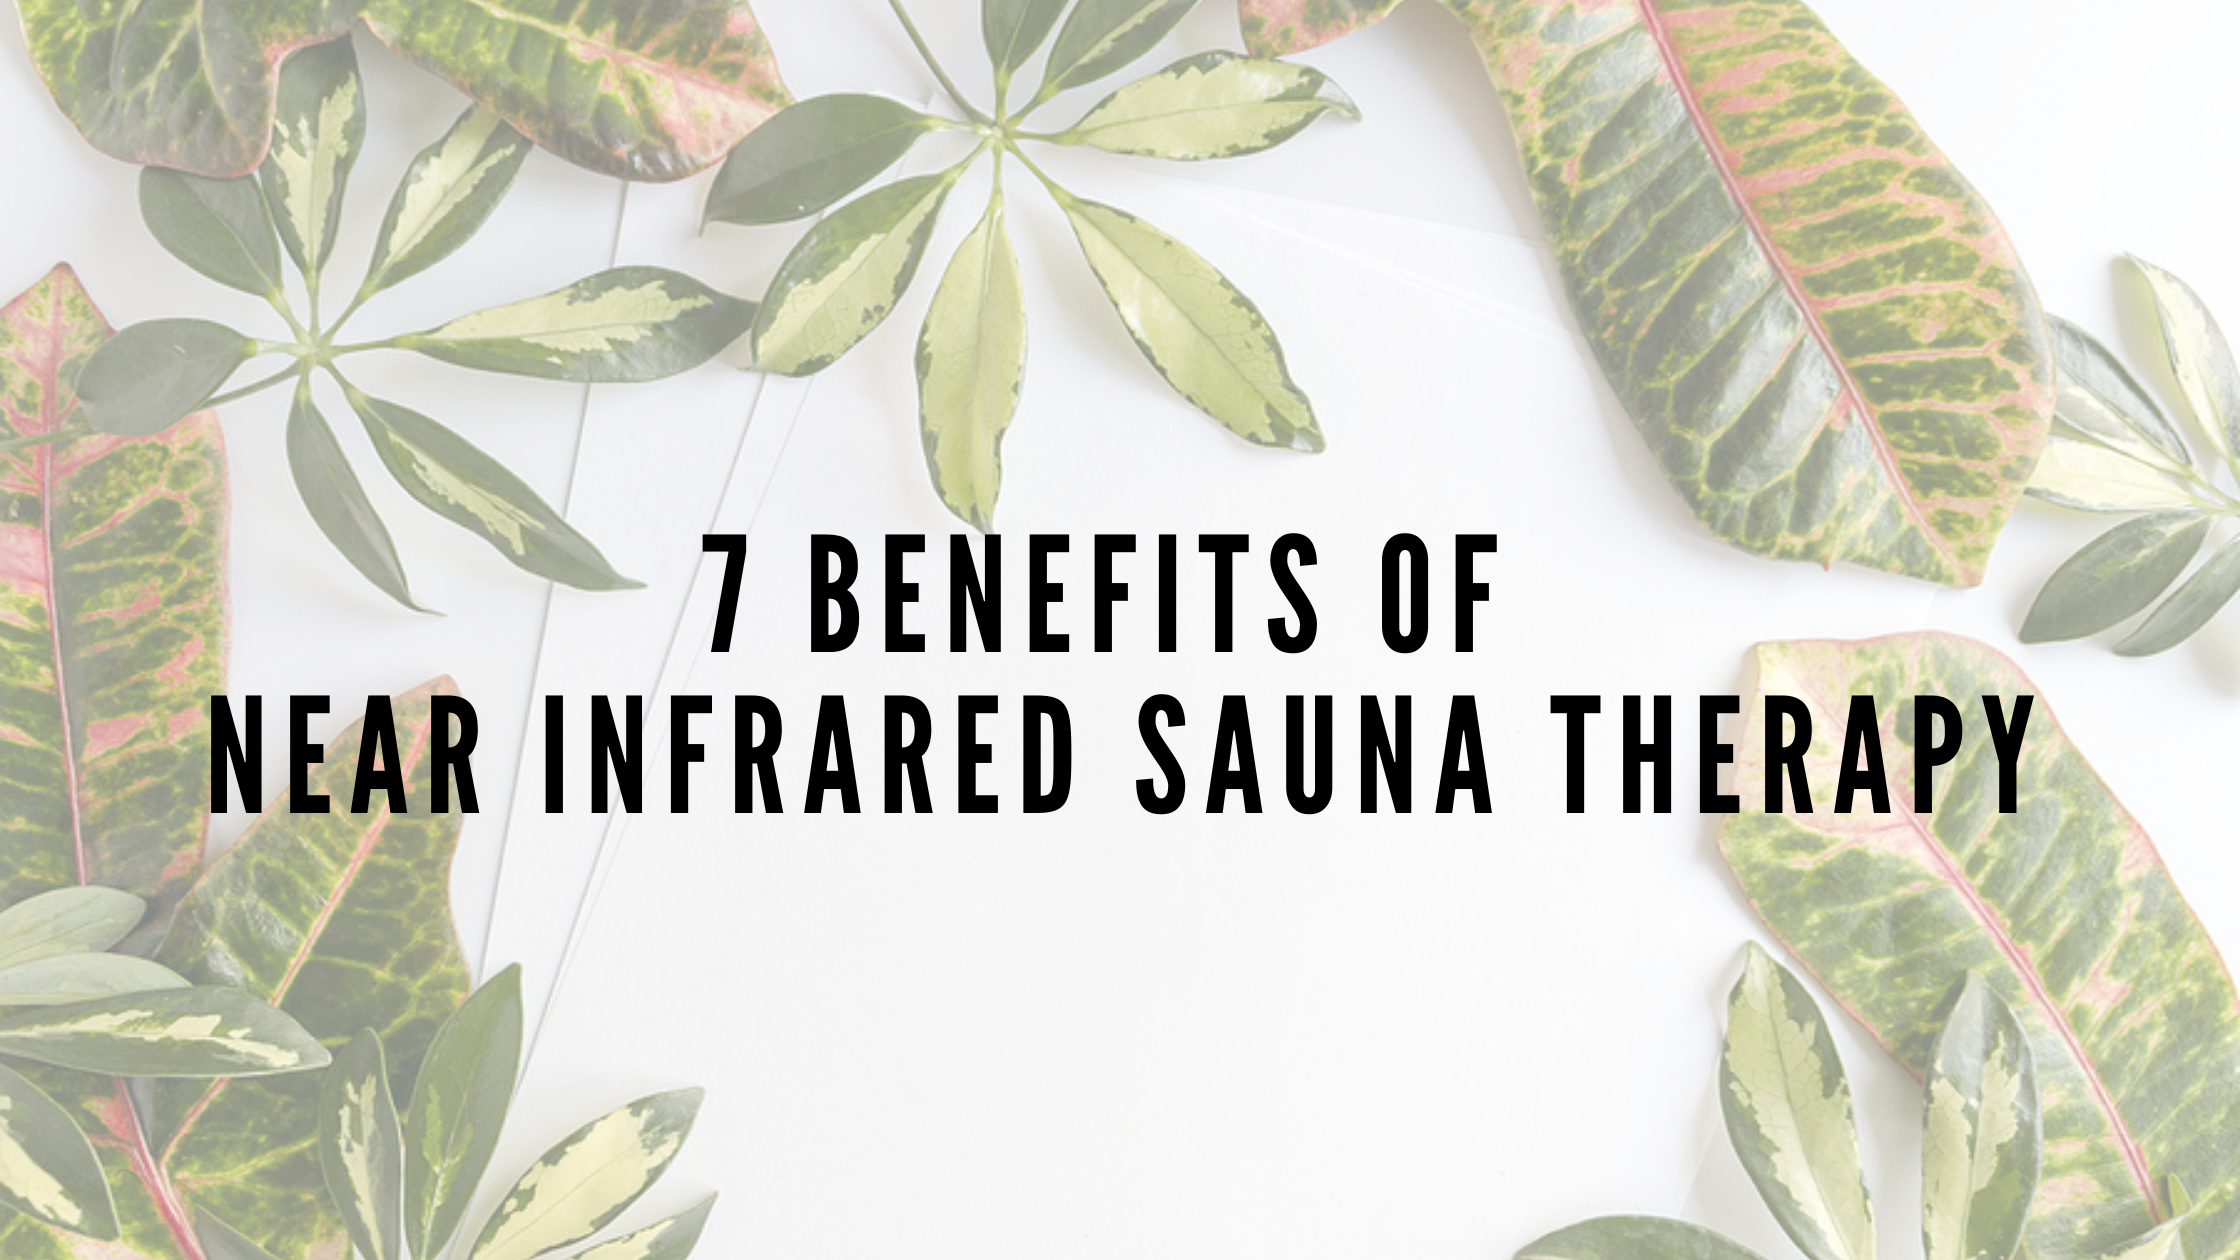 6 Health Benefits of Near Infrared Sauna Therapy -